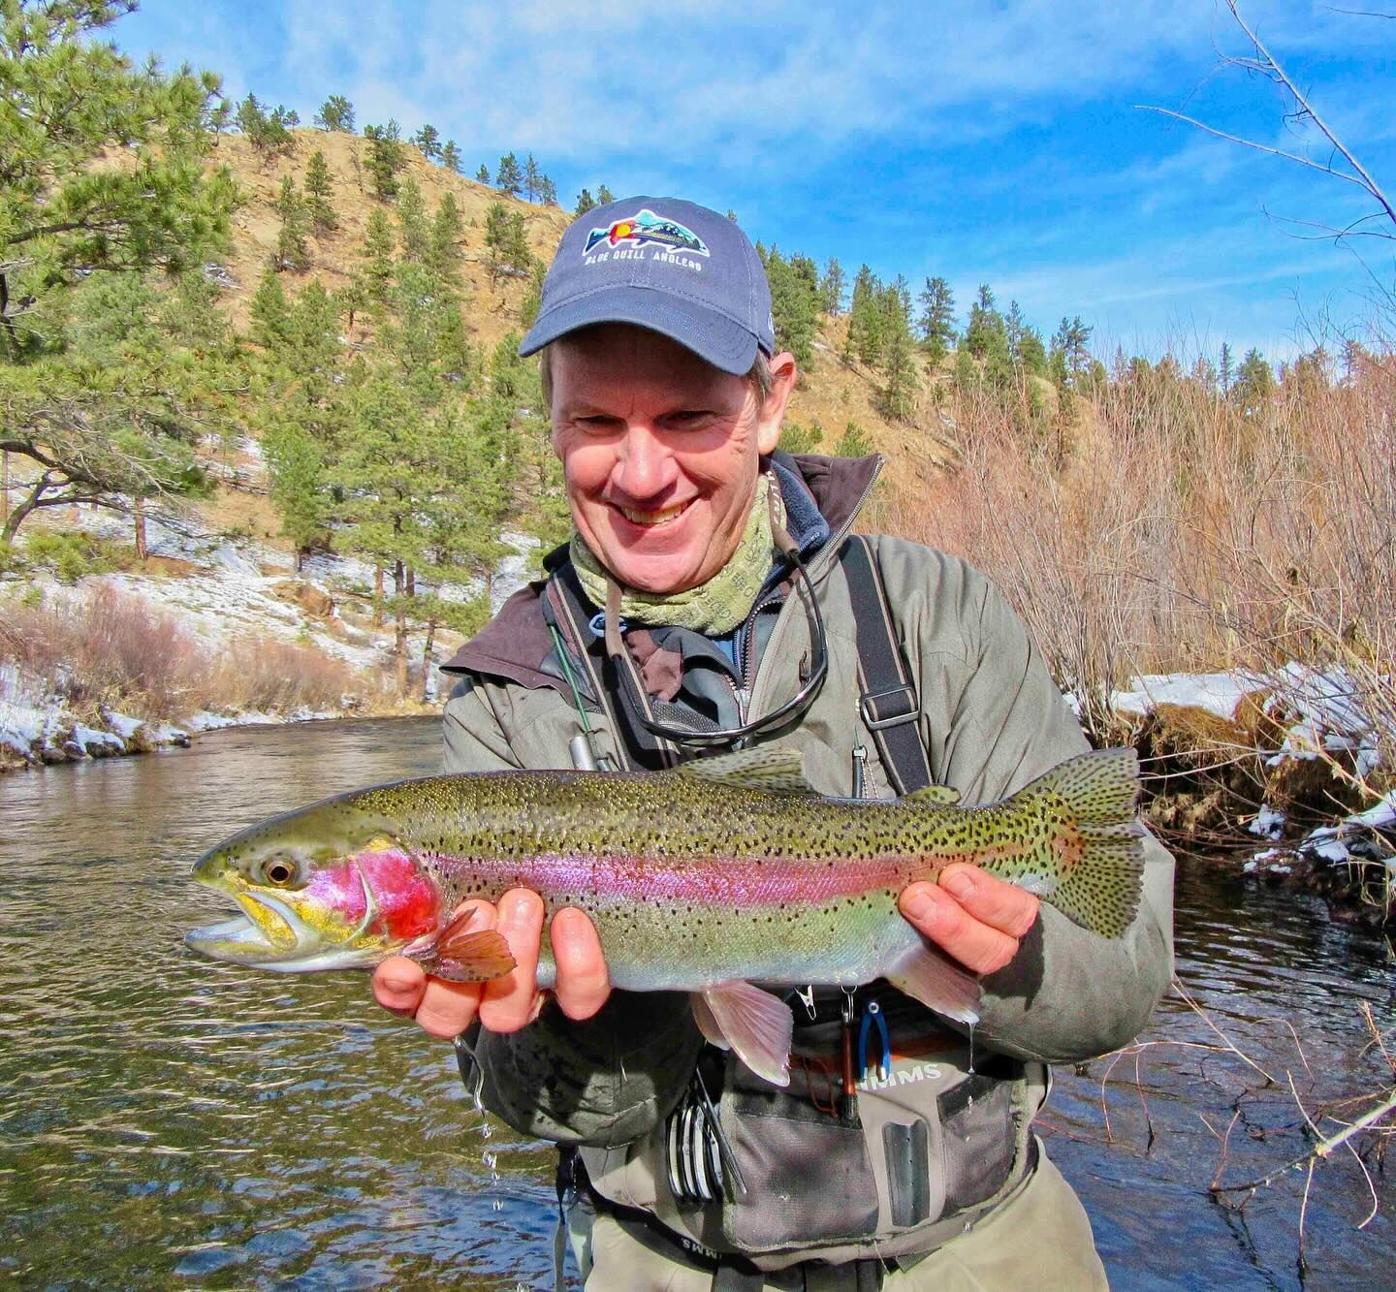 Pretty fly: New Mexico Trout to host annual fishing conclave with exhibits,  demonstrations and, of course, cookies, Lifestyle